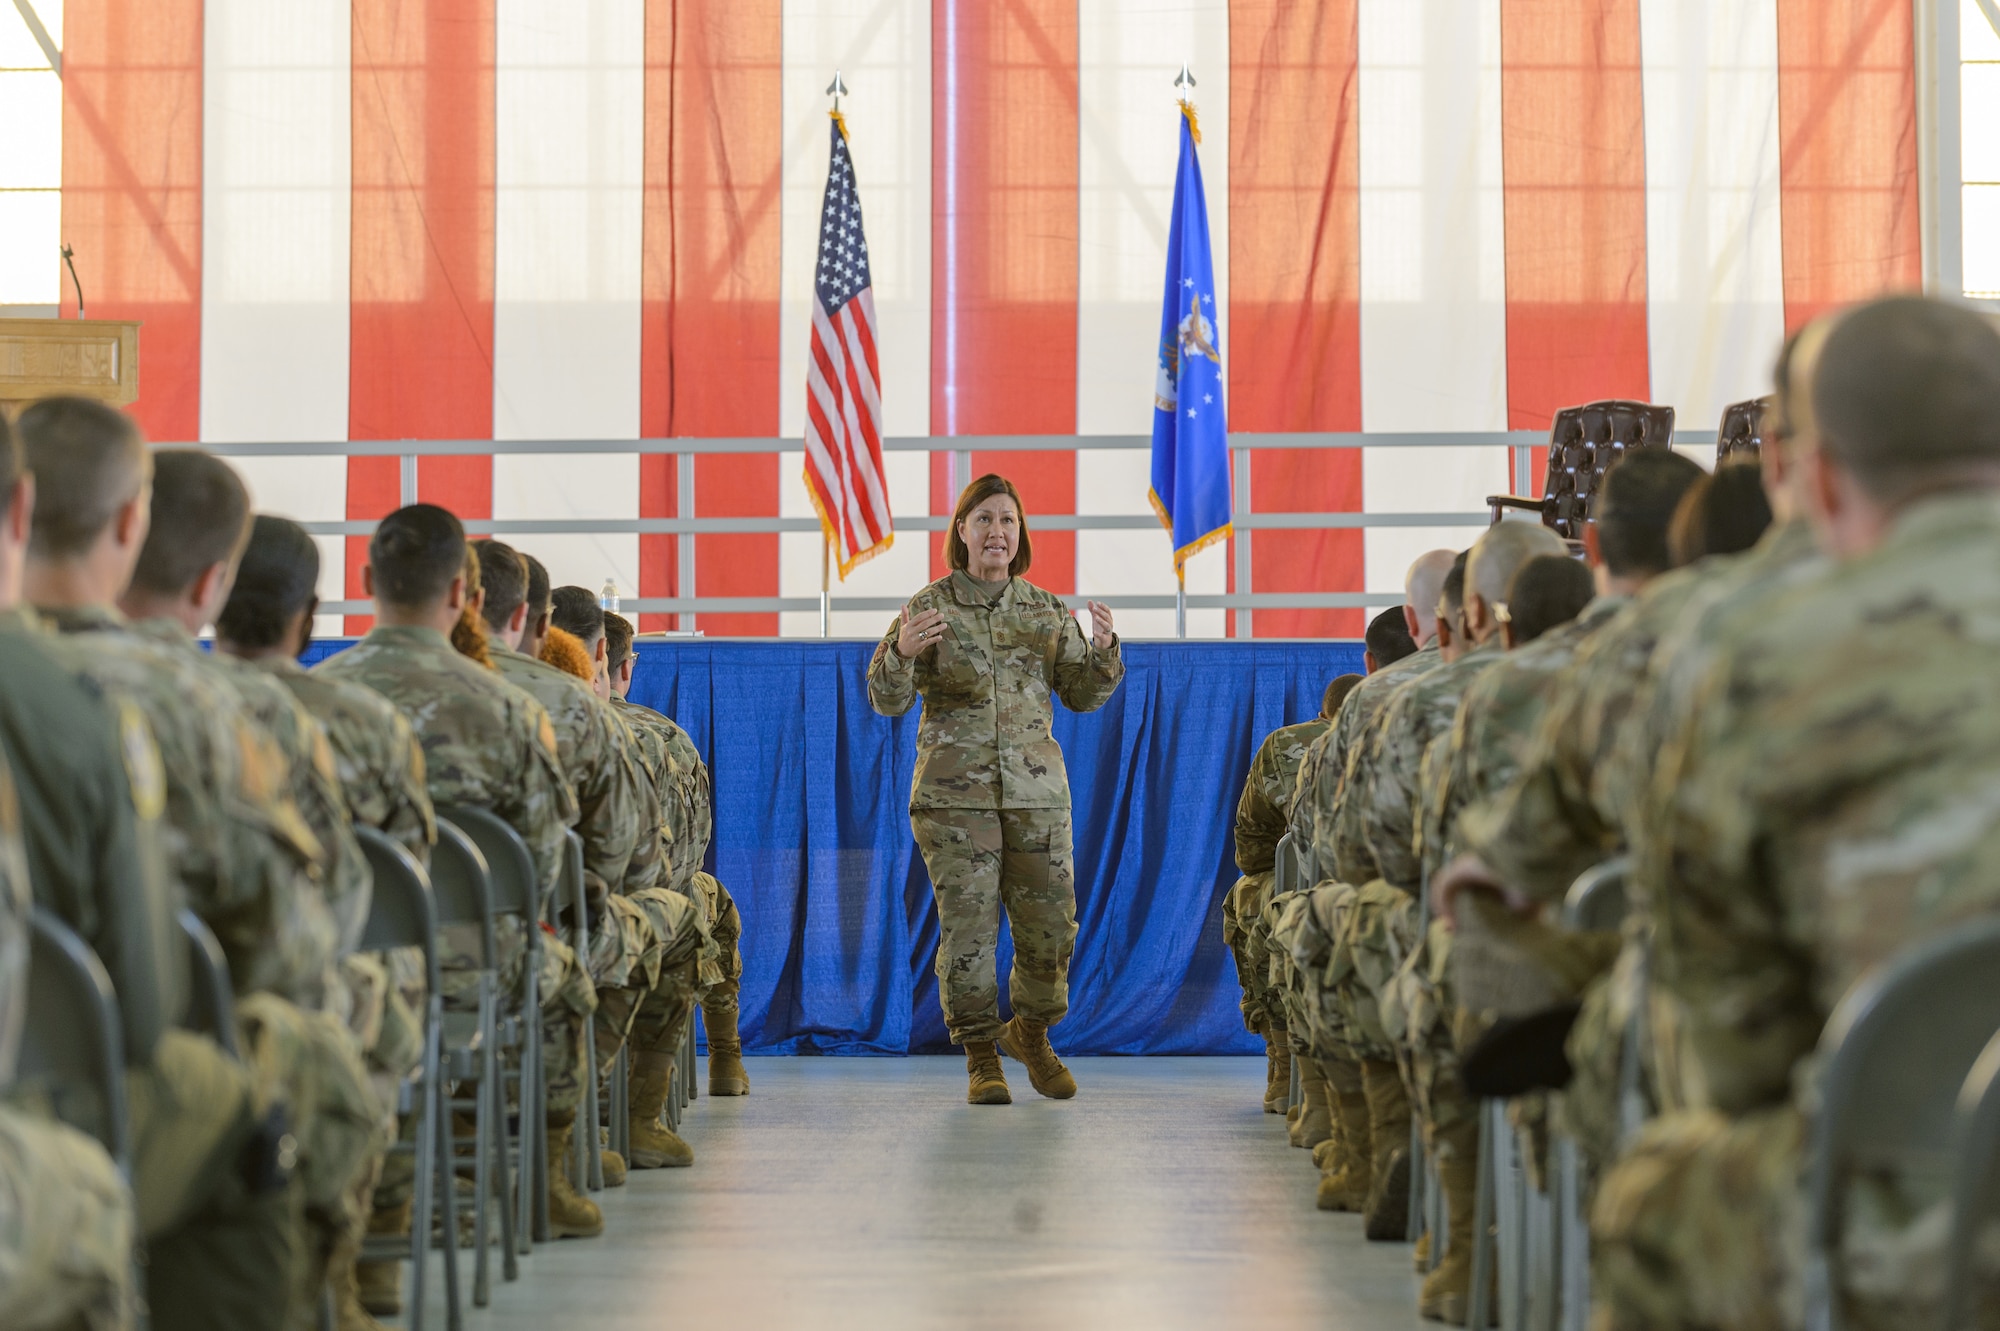 Chief Master Sgt. of the Air Force JoAnne S. Bass talks to almost 300 Airmen at a town hall during her visit to Edwards Air Force Base, California, June 29. (Air Force photo by Kyle Brasier)